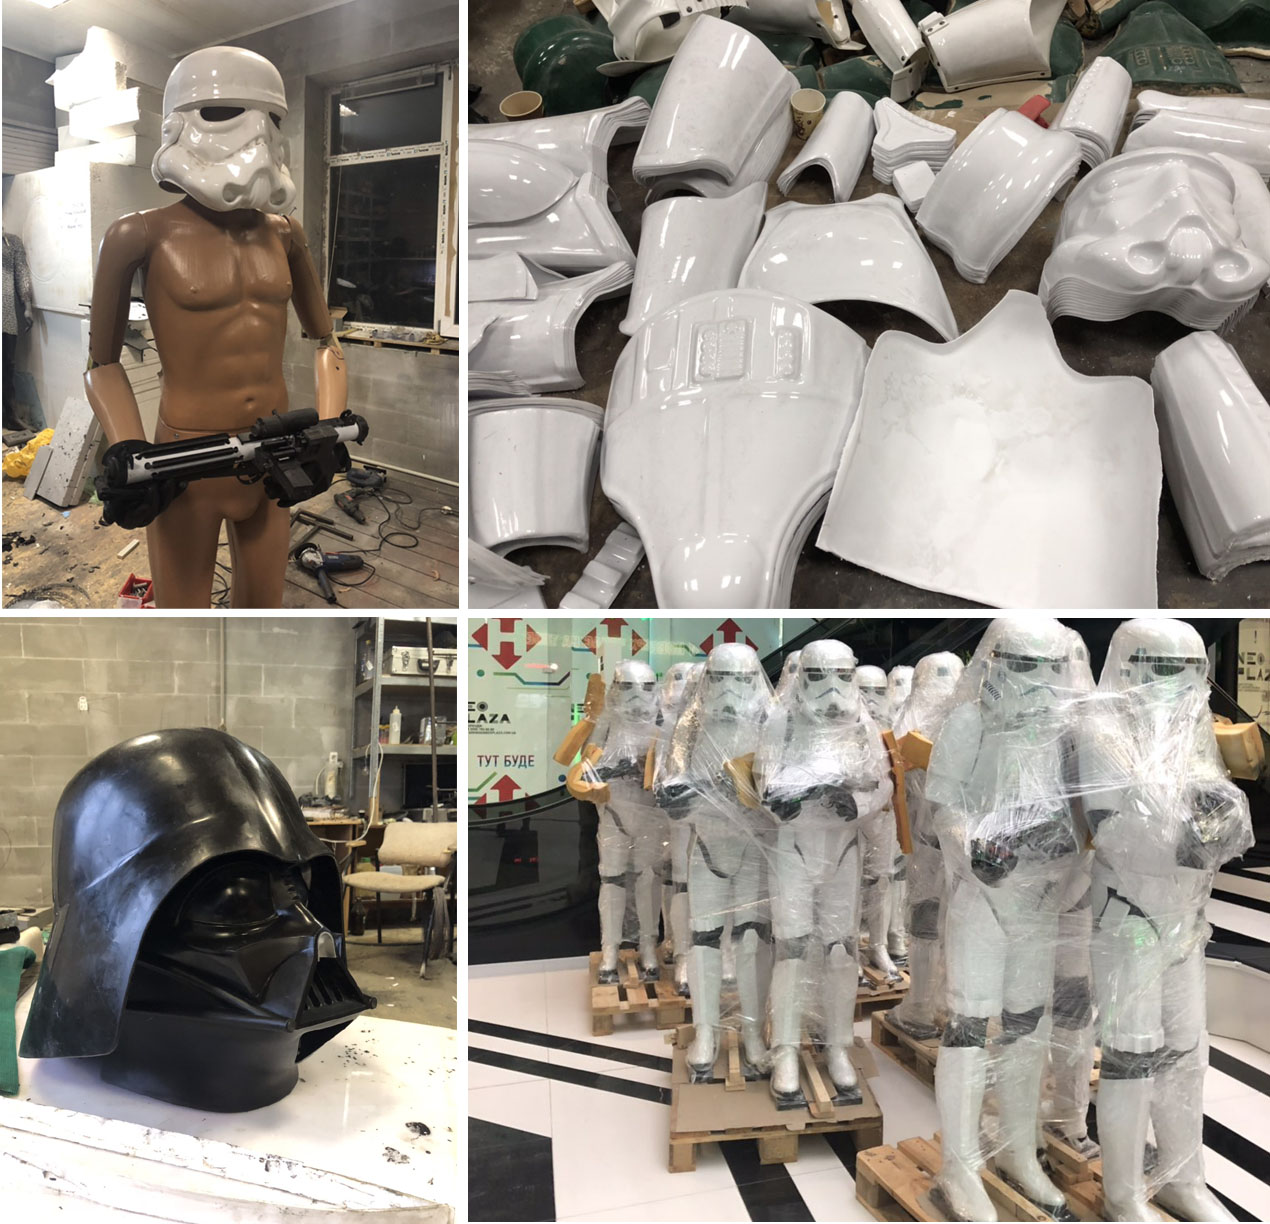 Decoration of imperial stormtroopers for the NEO PLAZA shopping center